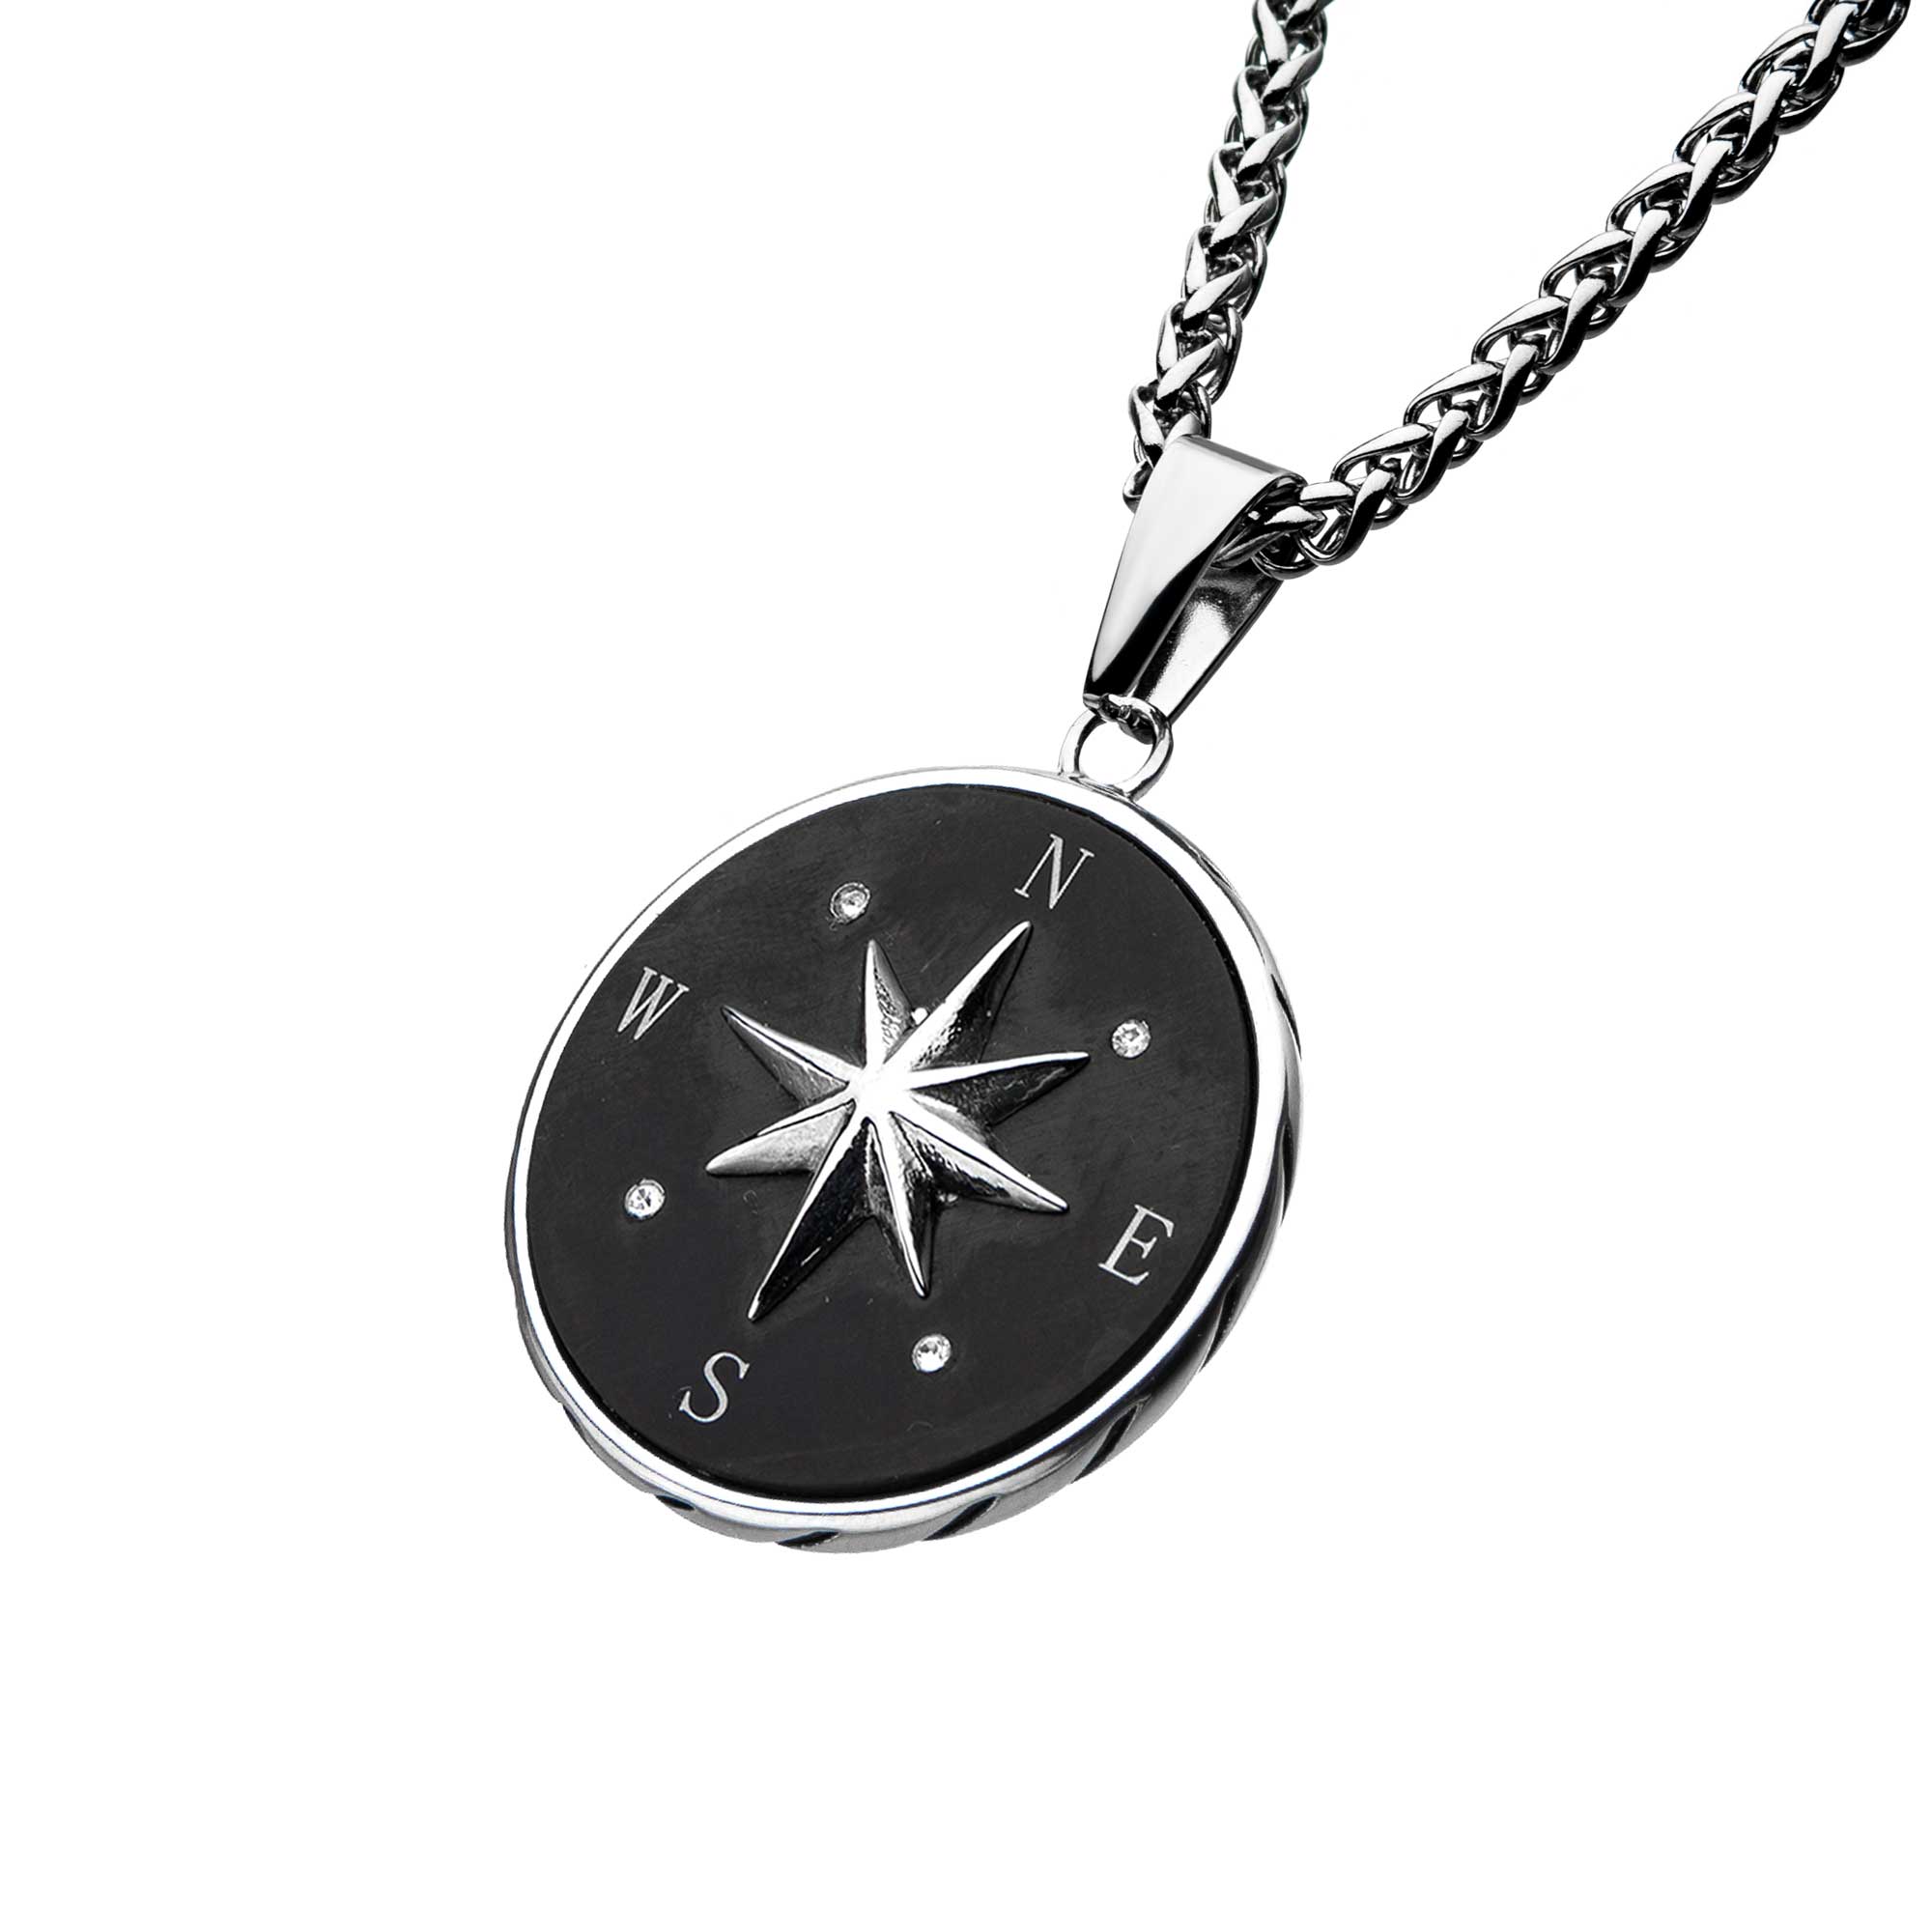 Stainless Steel and Black Plated Compass Pendant with Chain Image 2 Lewis Jewelers, Inc. Ansonia, CT